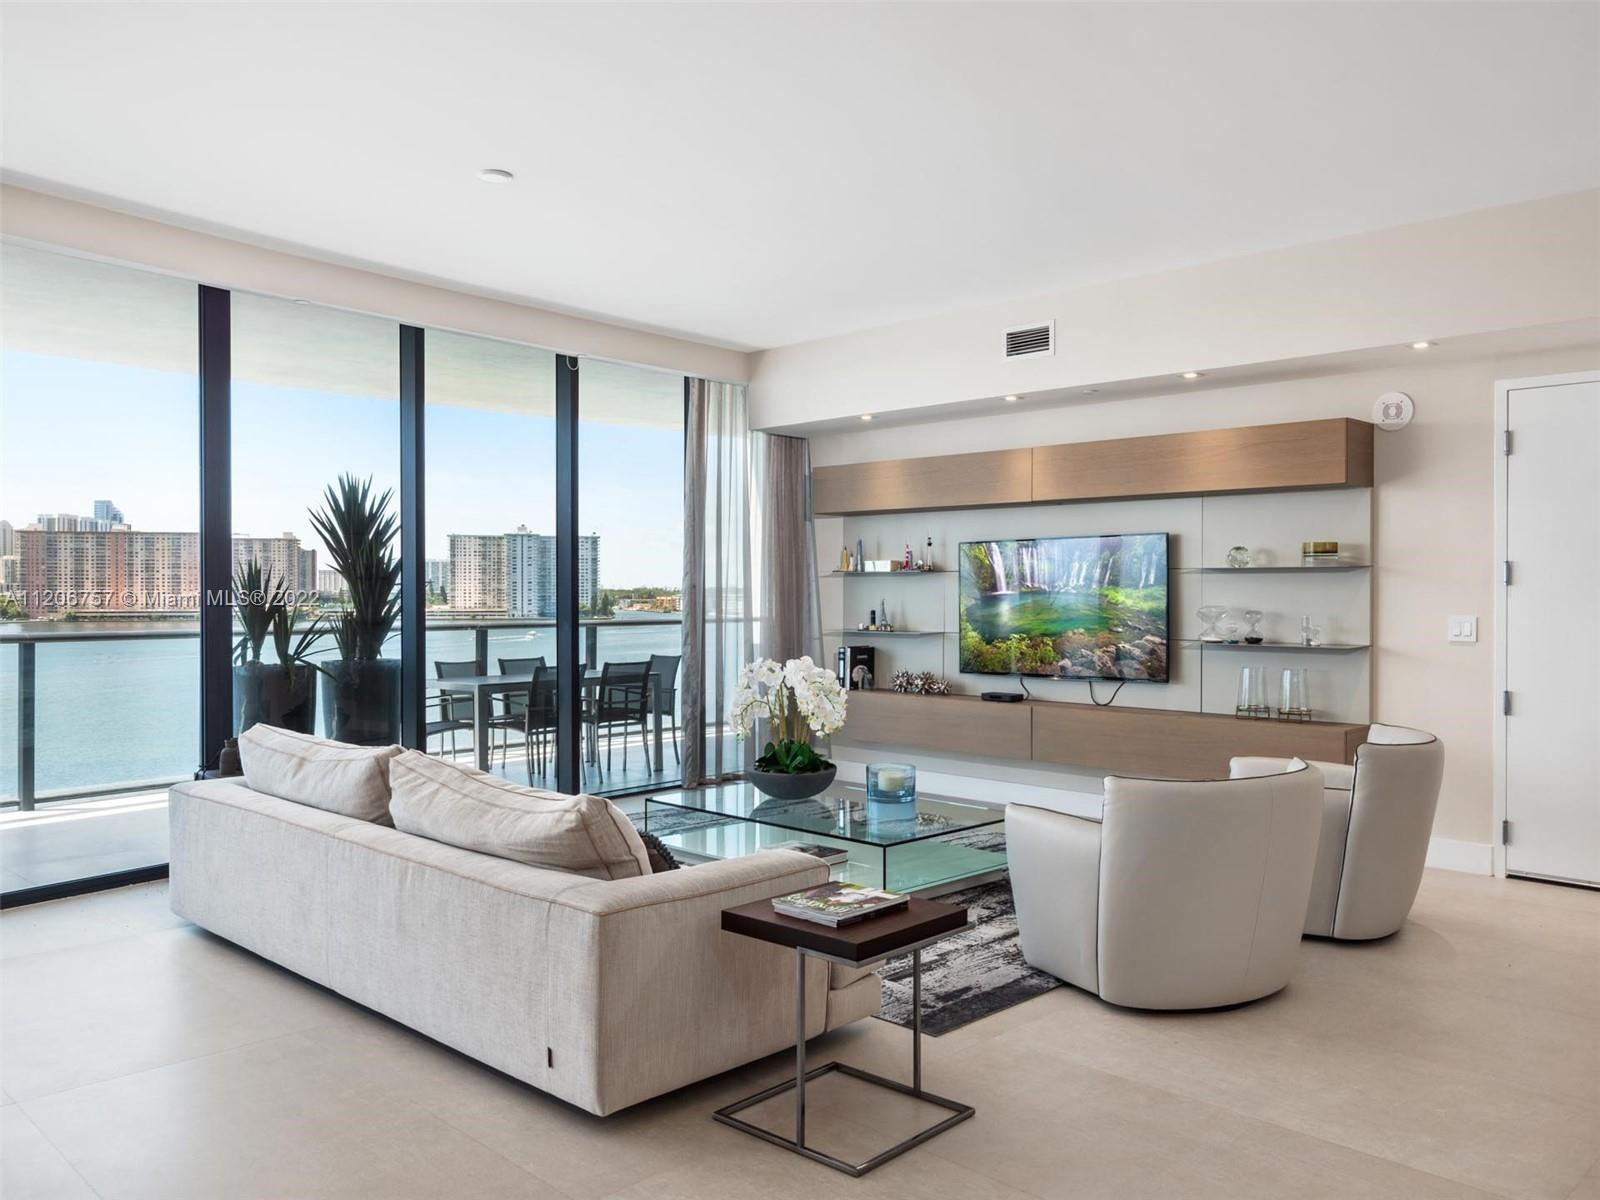 Welcome to this designer-ready two-bedroom two-and-a-half bathroom condo situated on a stunning priv